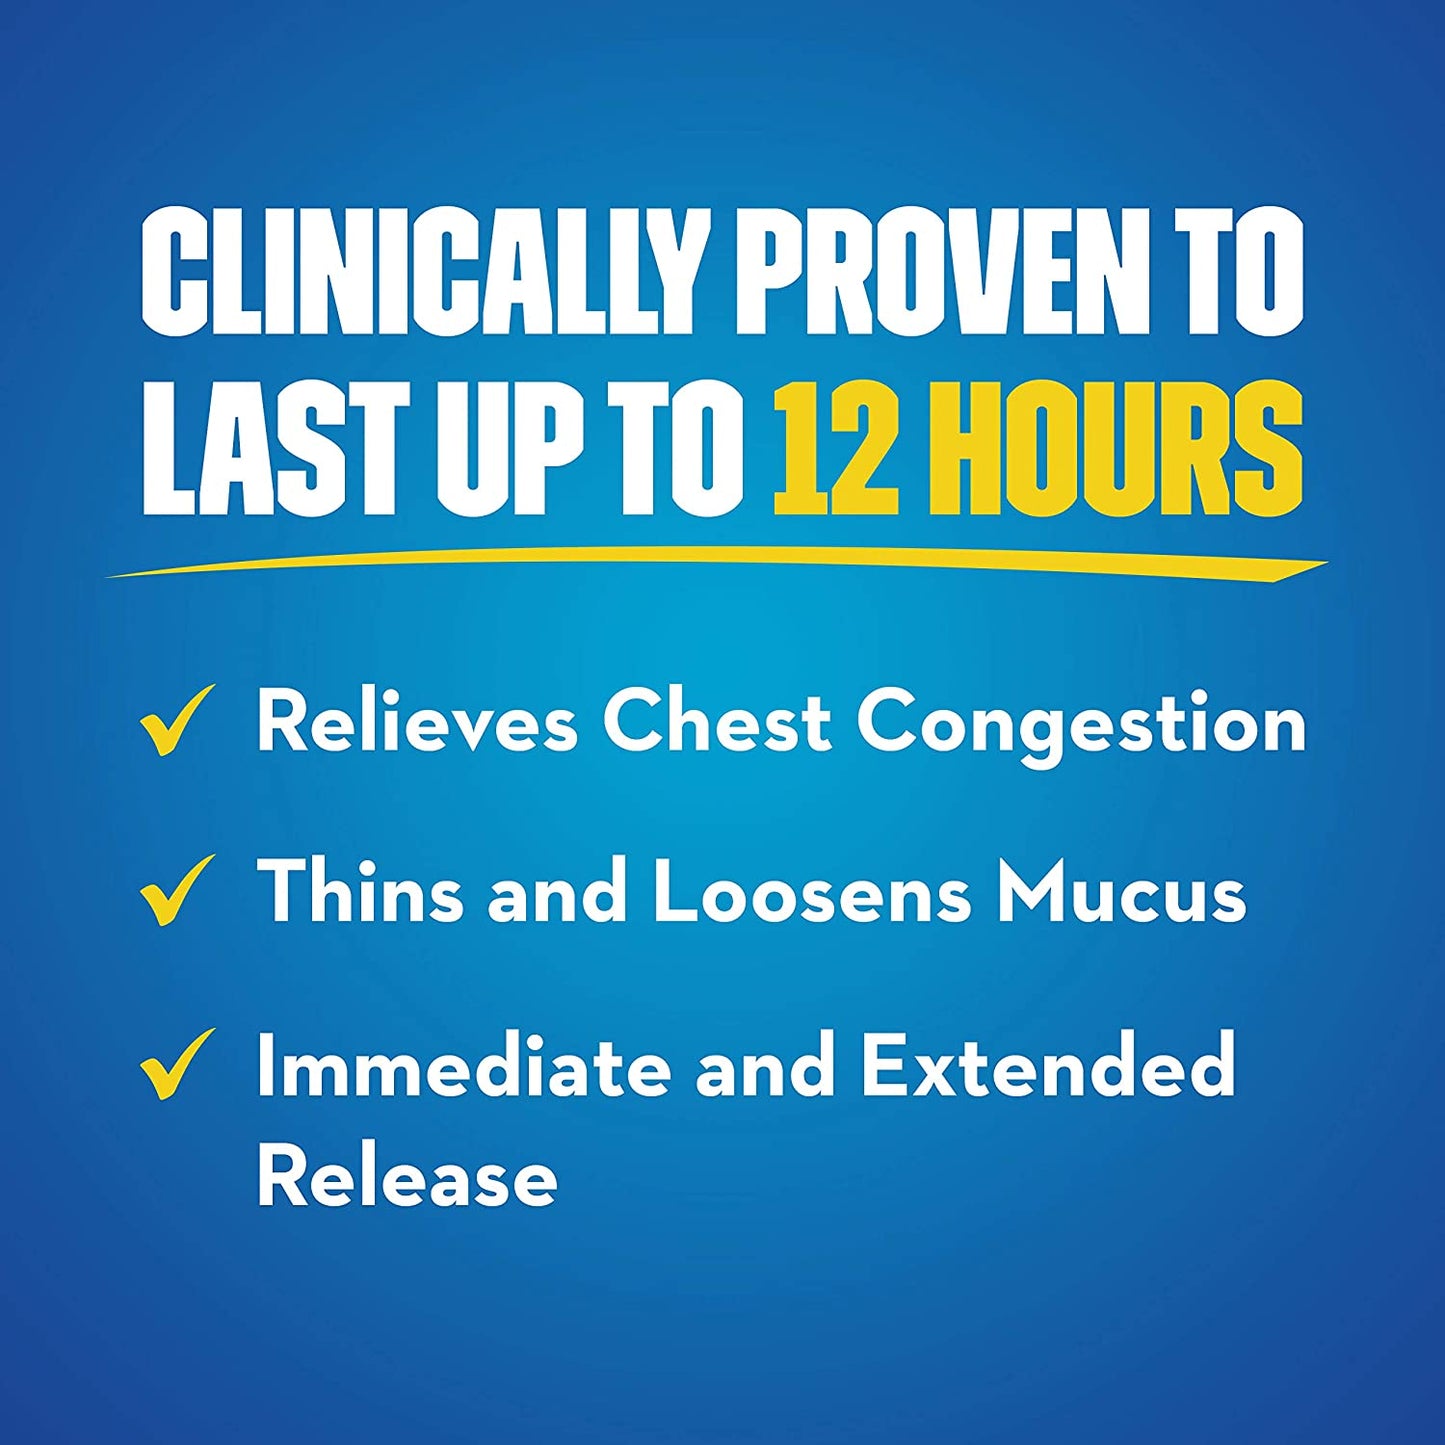 Mucinex 12 Hour Chest Congestion Relief 600mg Extended Release Bi-Layer - 100 Tablets